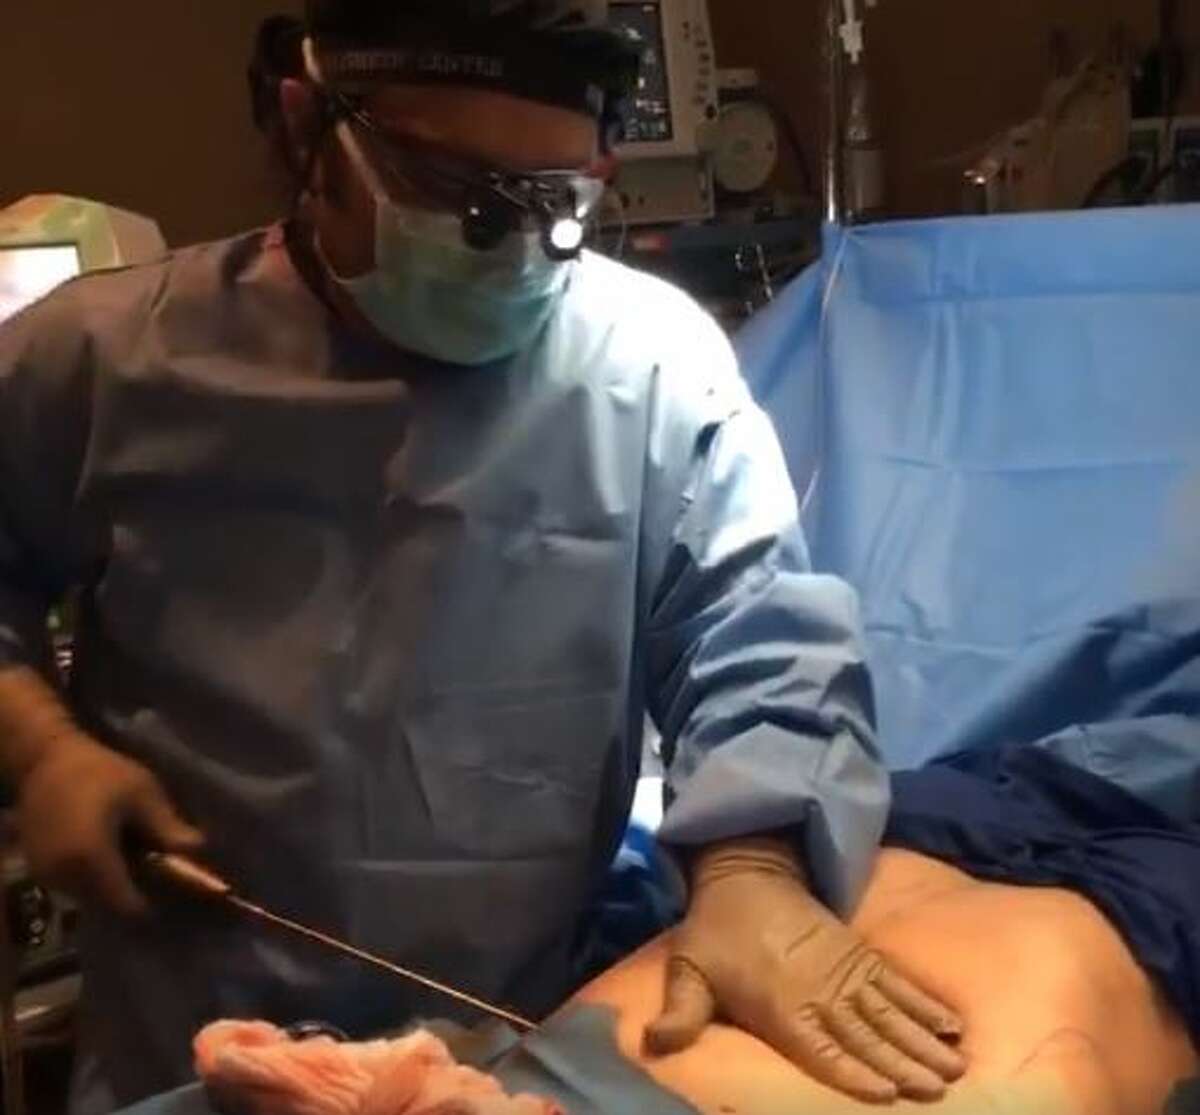 San Antonio's Dr. Thomas Jeneby is getting attention from clients for his practice of broadcasting surgeries on Facebook Live and Snapchat.